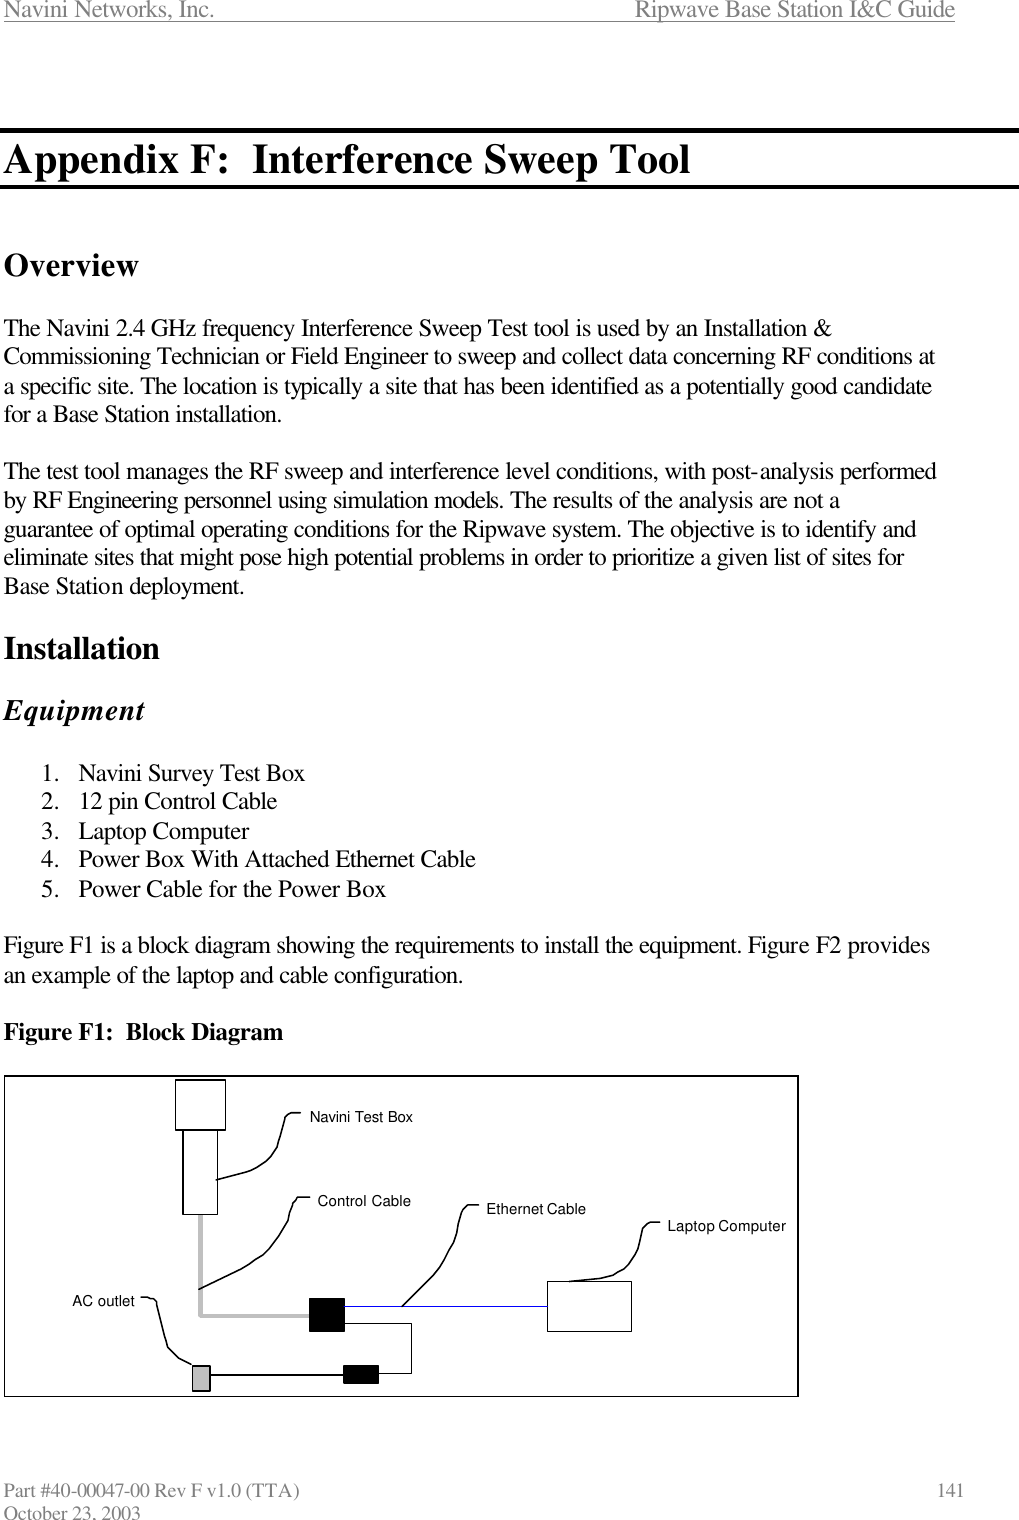 Navini Networks, Inc.                      Ripwave Base Station I&amp;C Guide Part #40-00047-00 Rev F v1.0 (TTA)                            141 October 23, 2003   Appendix F:  Interference Sweep Tool   Overview  The Navini 2.4 GHz frequency Interference Sweep Test tool is used by an Installation &amp; Commissioning Technician or Field Engineer to sweep and collect data concerning RF conditions at a specific site. The location is typically a site that has been identified as a potentially good candidate for a Base Station installation.   The test tool manages the RF sweep and interference level conditions, with post-analysis performed by RF Engineering personnel using simulation models. The results of the analysis are not a guarantee of optimal operating conditions for the Ripwave system. The objective is to identify and eliminate sites that might pose high potential problems in order to prioritize a given list of sites for Base Station deployment.   Installation  Equipment  1.  Navini Survey Test Box 2.  12 pin Control Cable 3.  Laptop Computer 4.  Power Box With Attached Ethernet Cable 5.  Power Cable for the Power Box  Figure F1 is a block diagram showing the requirements to install the equipment. Figure F2 provides an example of the laptop and cable configuration.  Figure F1:  Block Diagram             Navini Test BoxLaptop ComputerAC outletControl Cable Ethernet Cable